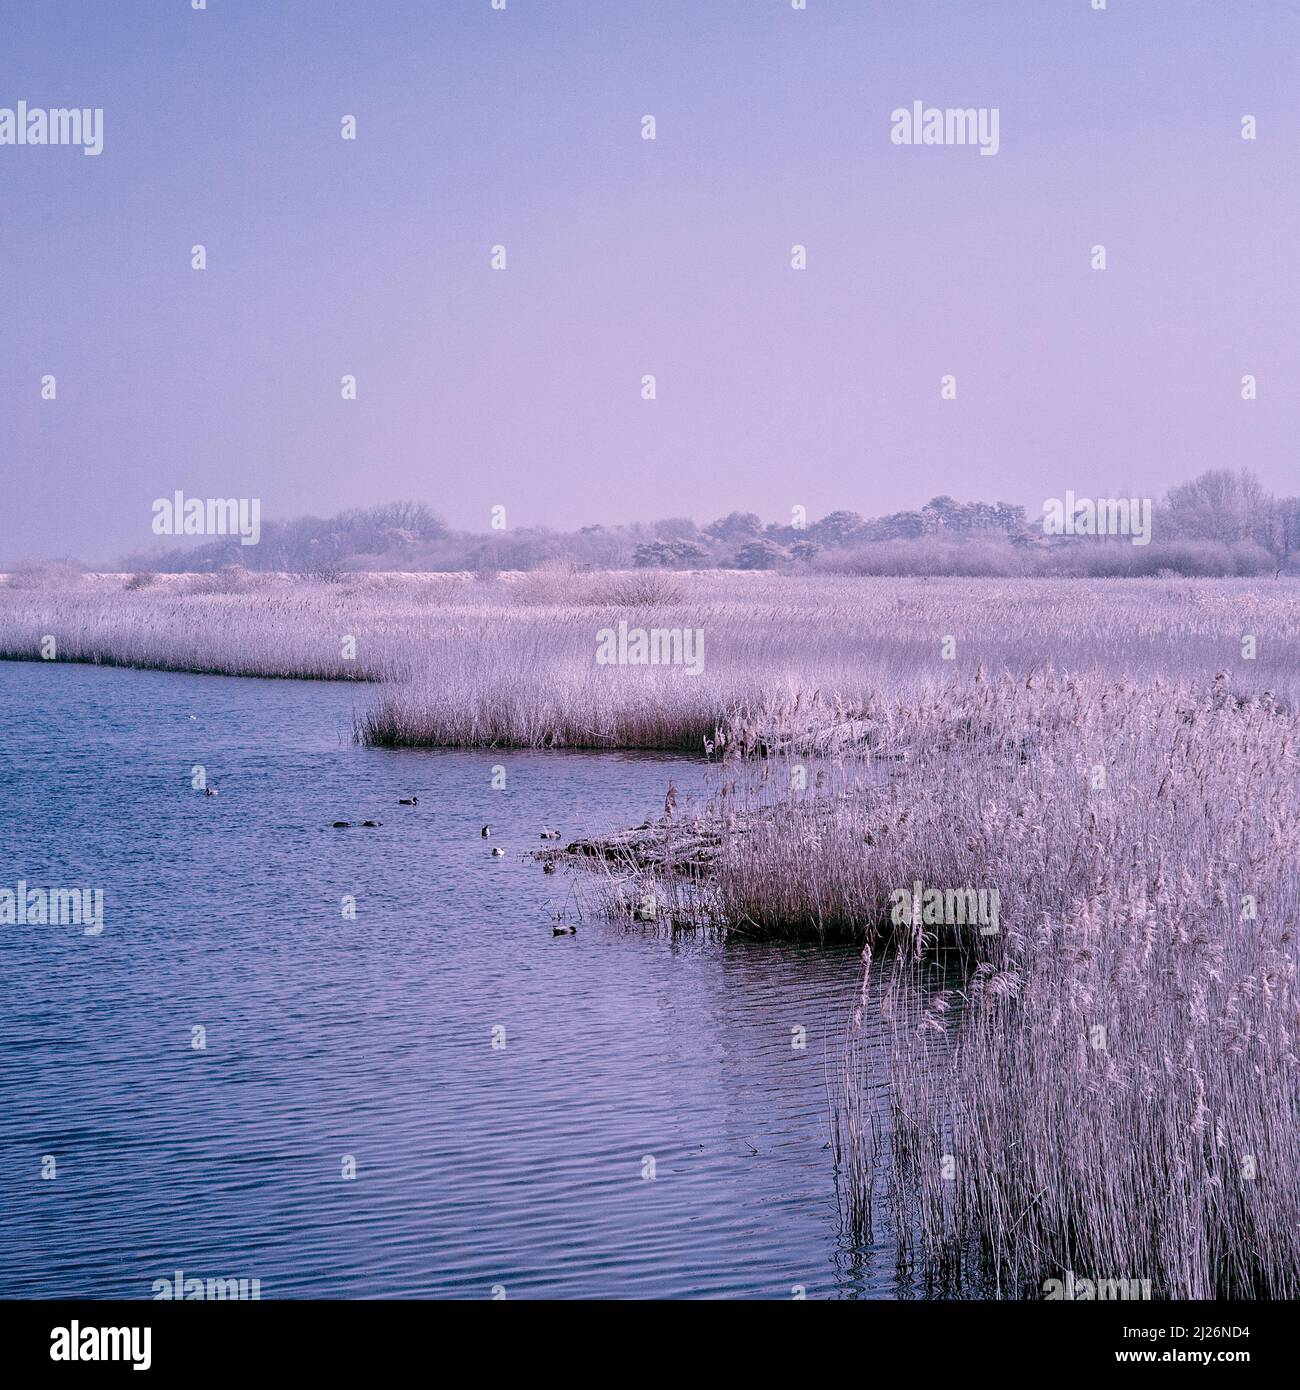 Infra Red Image of Freshwater marsh at RSPB Titchwell Marsh in East Anglia on a Sunny March Morning Stock Photo